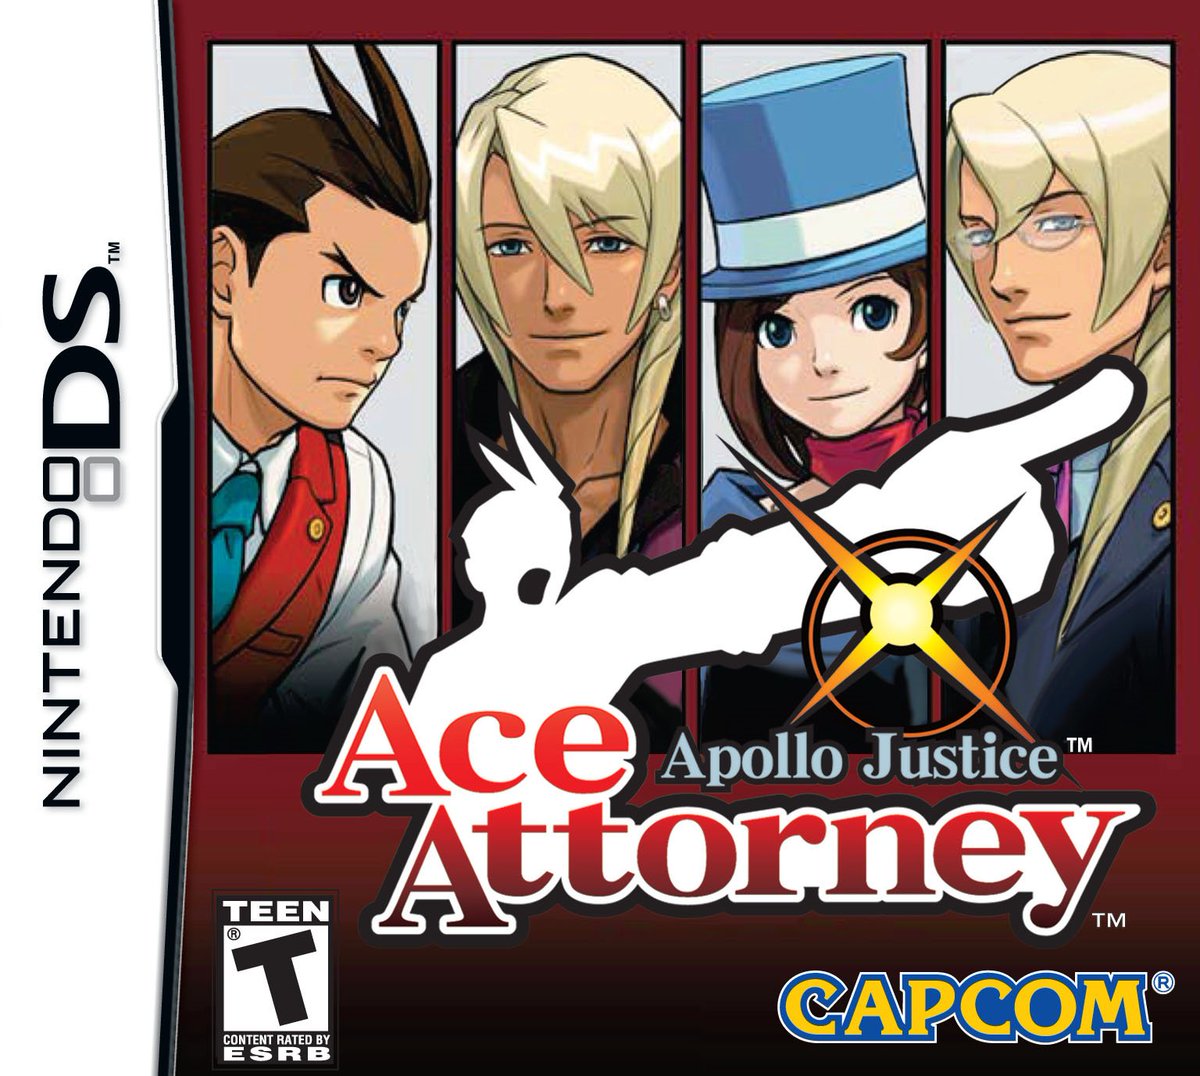 If you've already aquainted yourself with the series, the next place to go is Apollo Justice: Ace Attorney. This game follows a new protagonist and story, whilst keeping the same classic gameplay.